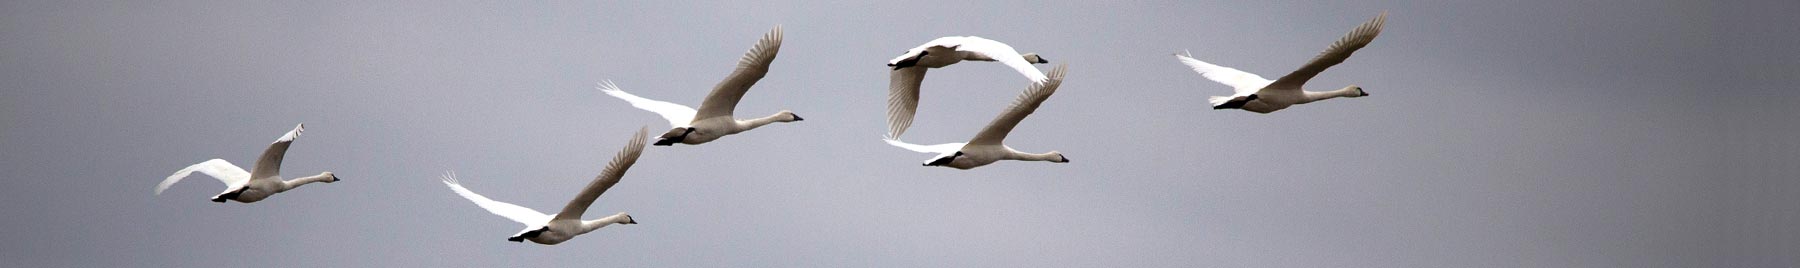 Tundra swans flying against a gray sky